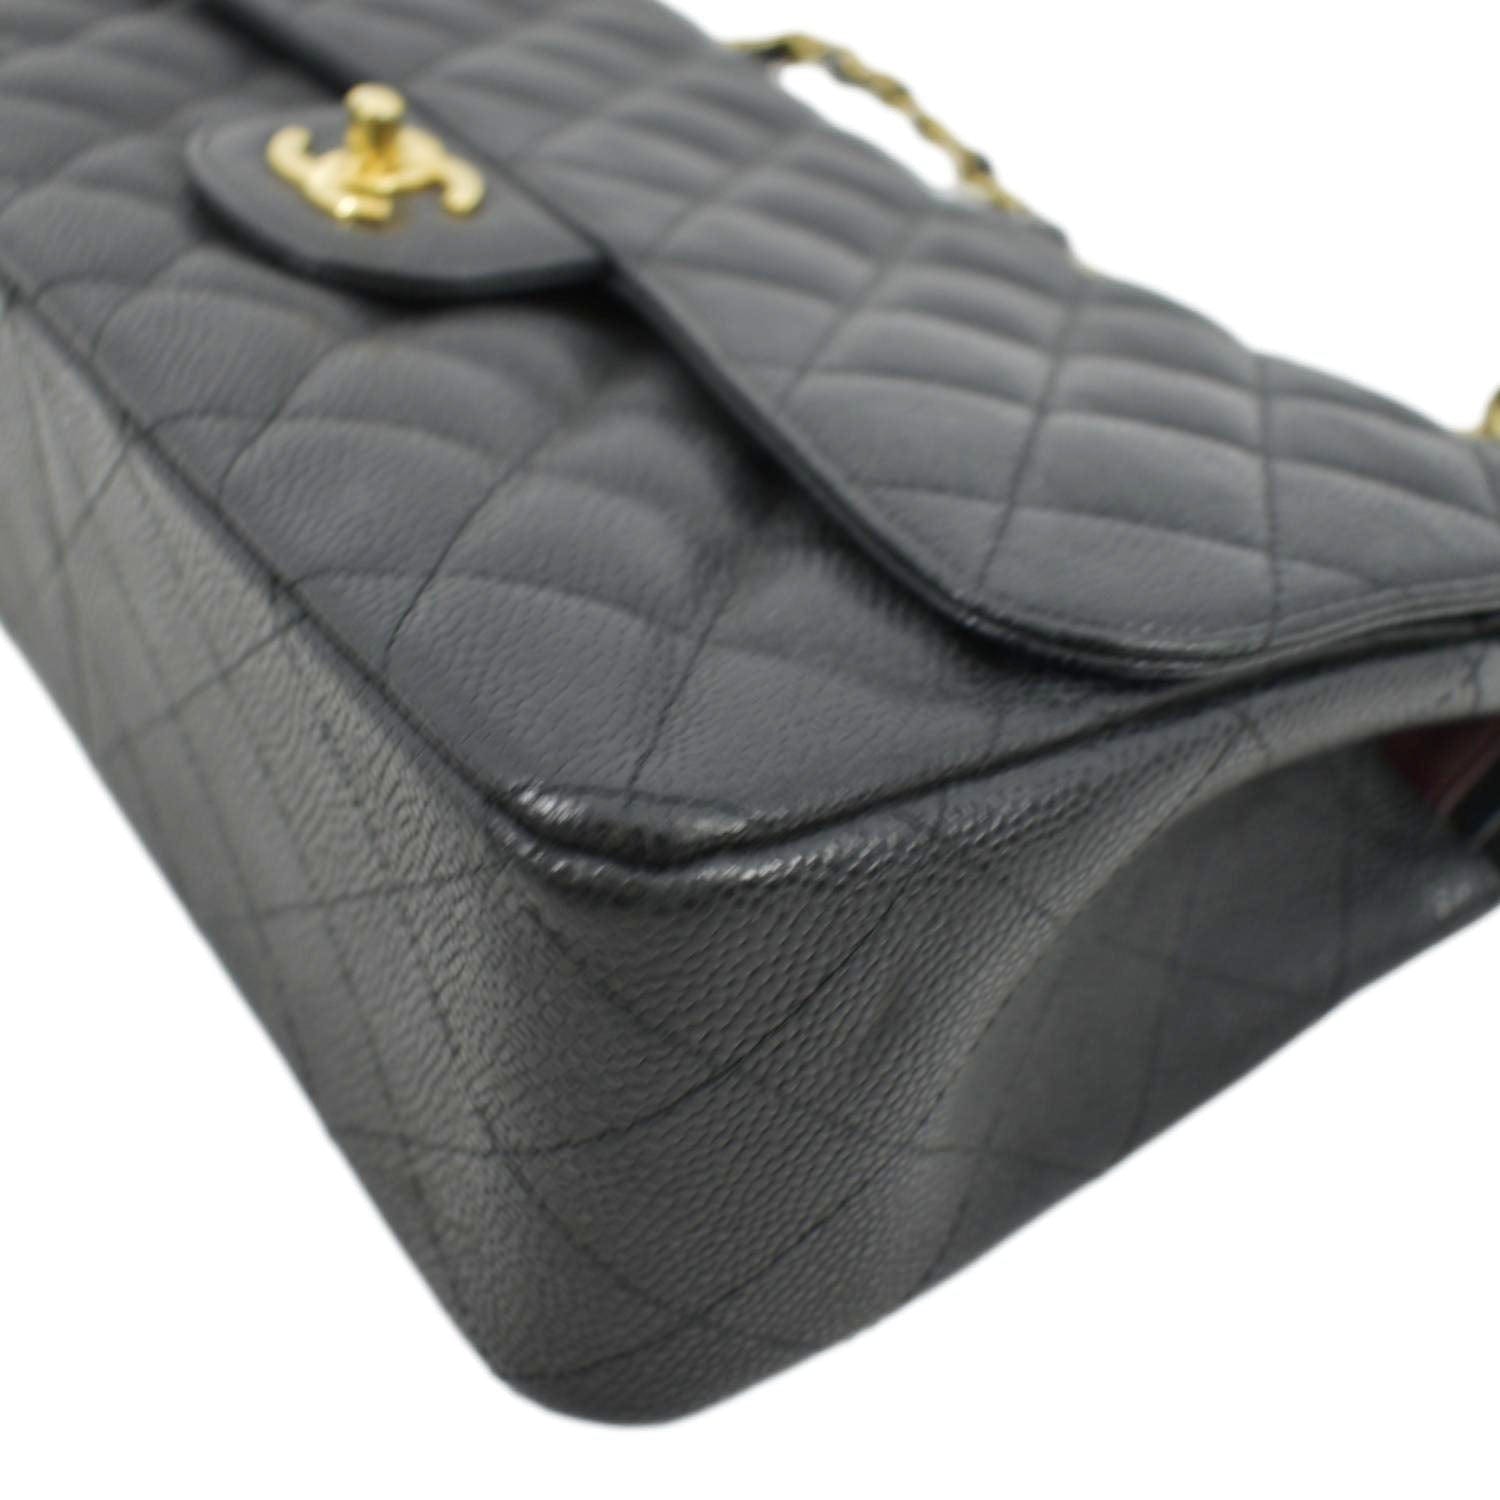 Sizing Up Chanel's Classic Flap Bags  Chanel classic flap bag, Classic flap  bag, Chanel bag